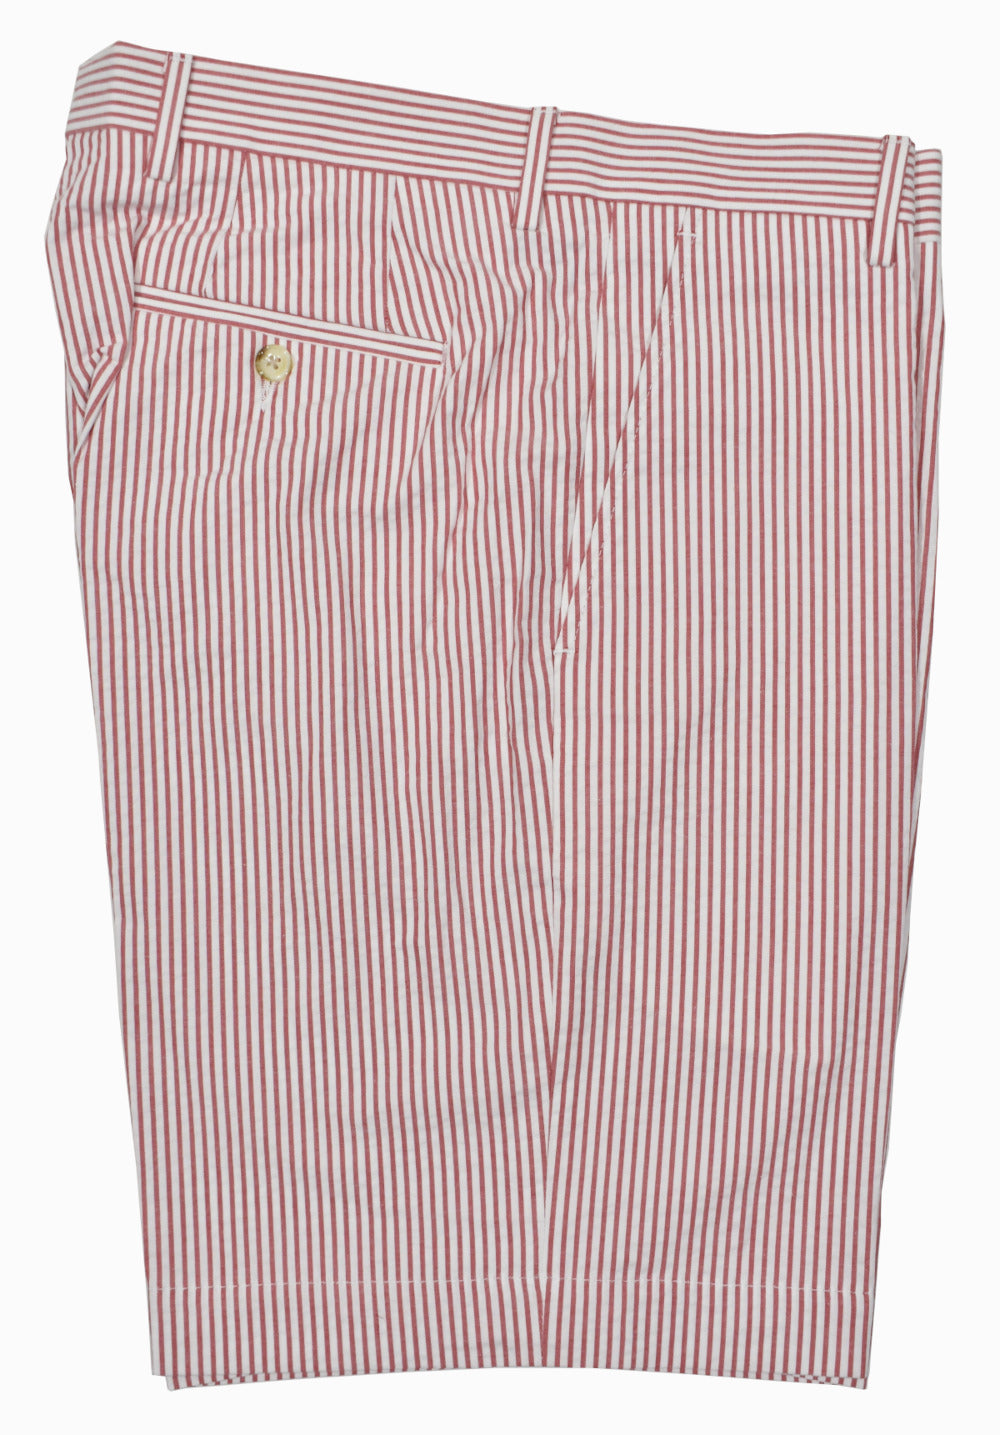 Dress up your Spring/Summer look with a classic seersucker stripe short, sure to be a nice change from your everyday solid shorts.  100% soft combed cotton for comfort and breathability.  Just above the knees length, classic pockets and classic fit.  Colors: Blue, Red